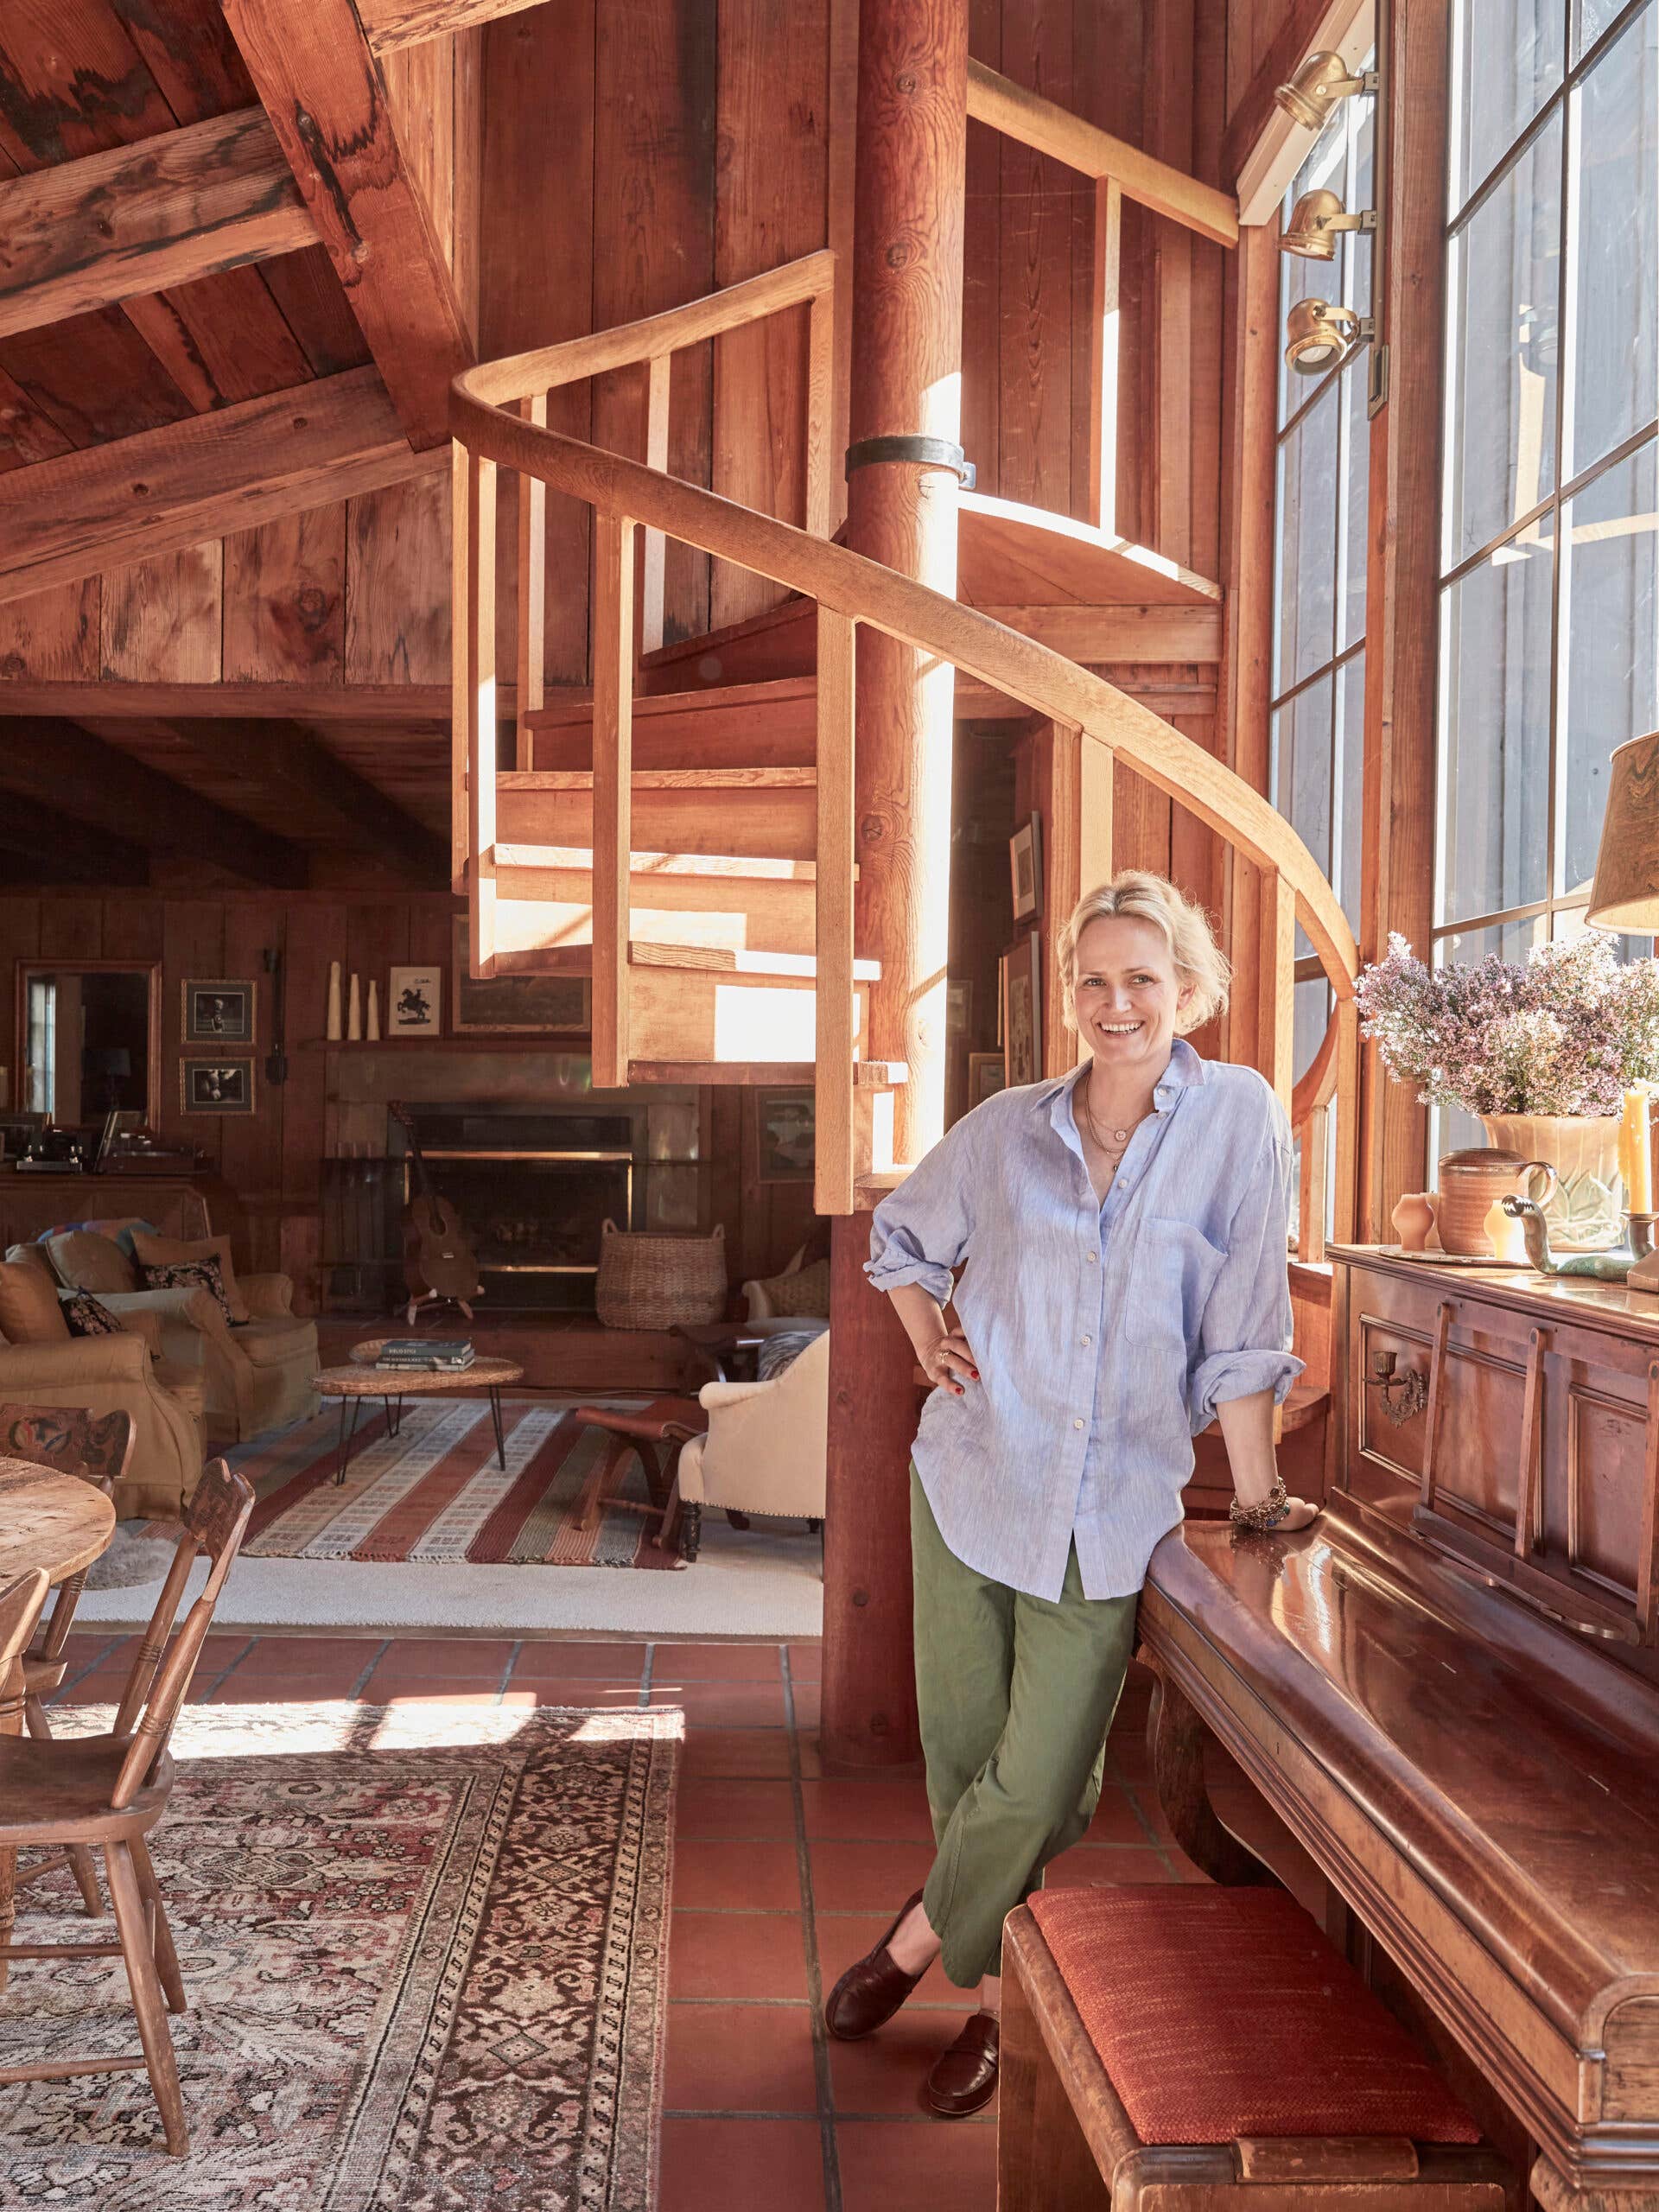 Otherworldly Light and Redwood Walls Make This Designer Feel at Home in Her Family’s California Retreat